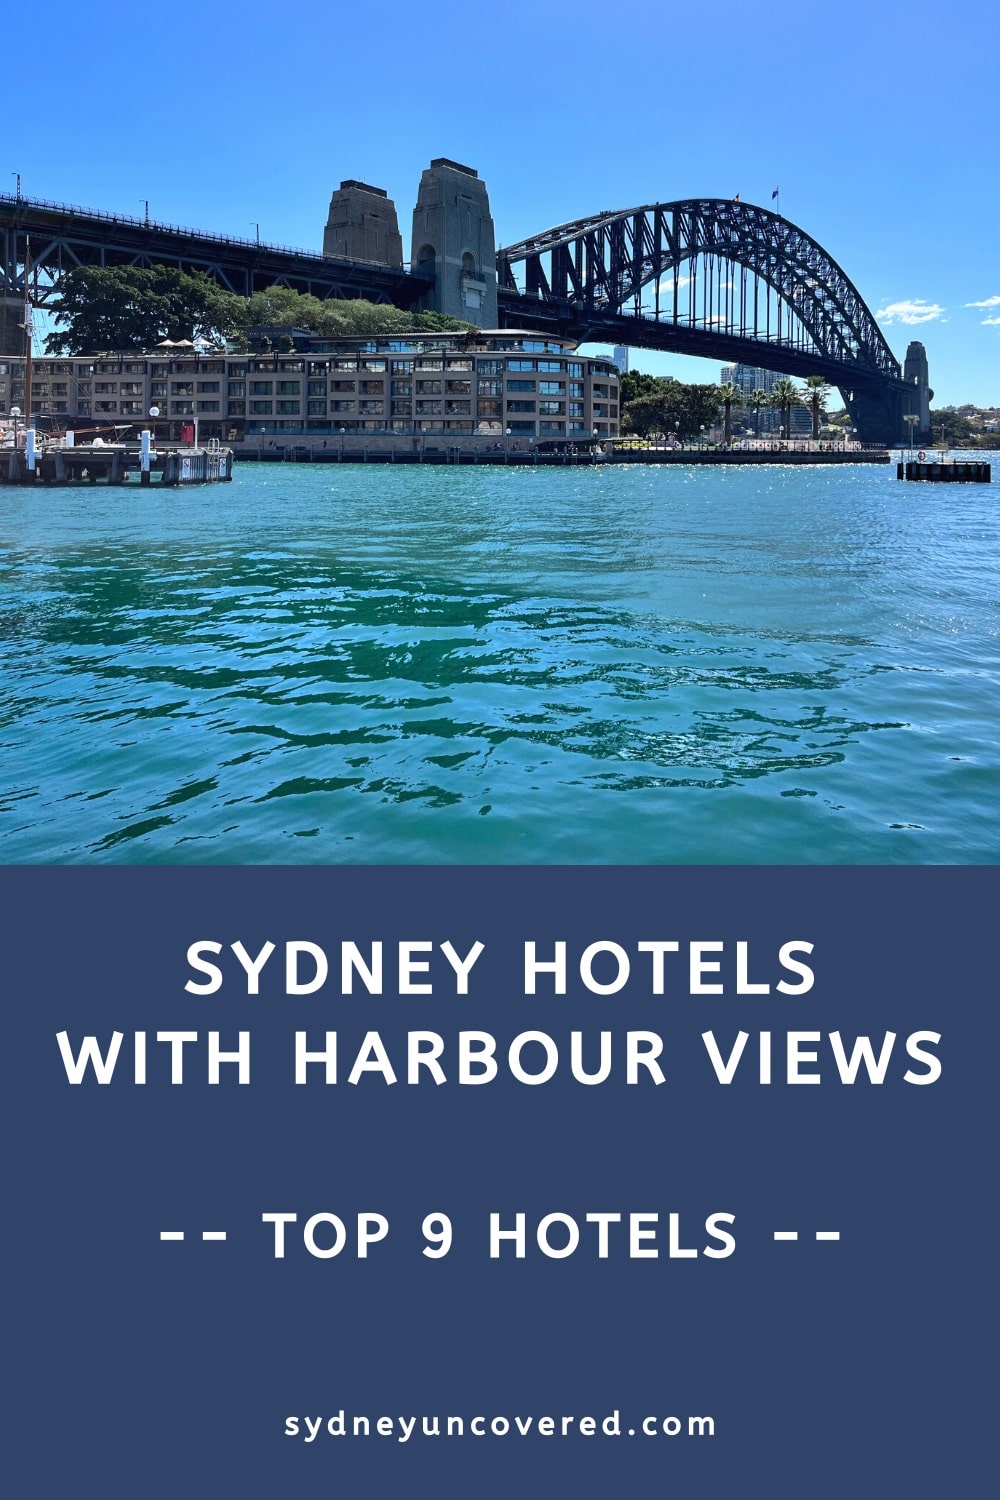 Hotels with Sydney Harbour views (accommodation guide)